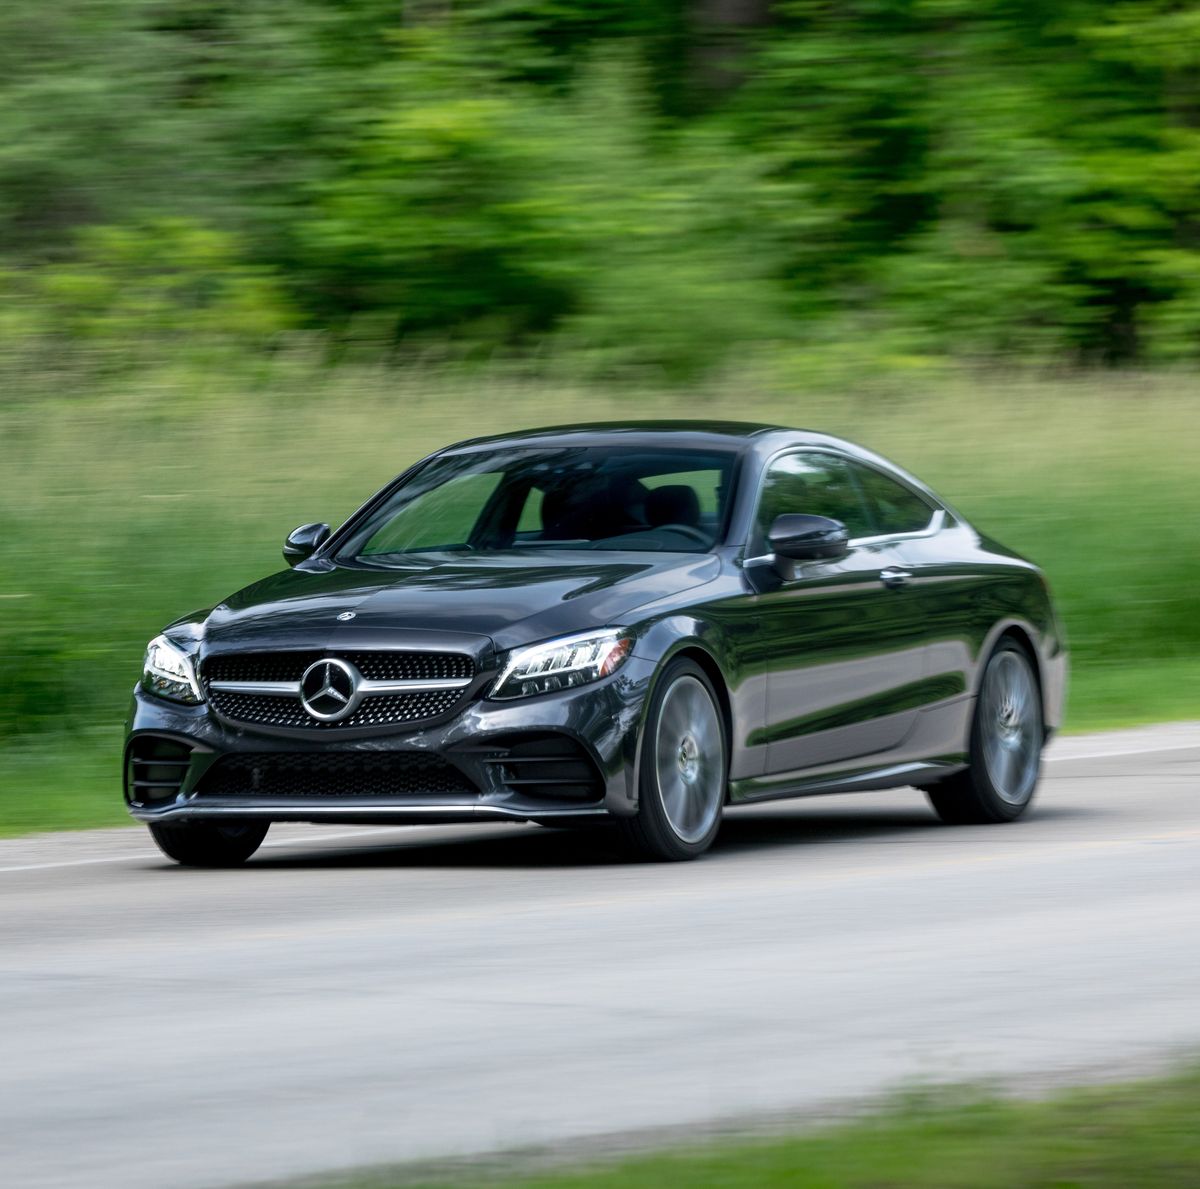 Tested: 2019 C300 Is Quicker, Looks Great